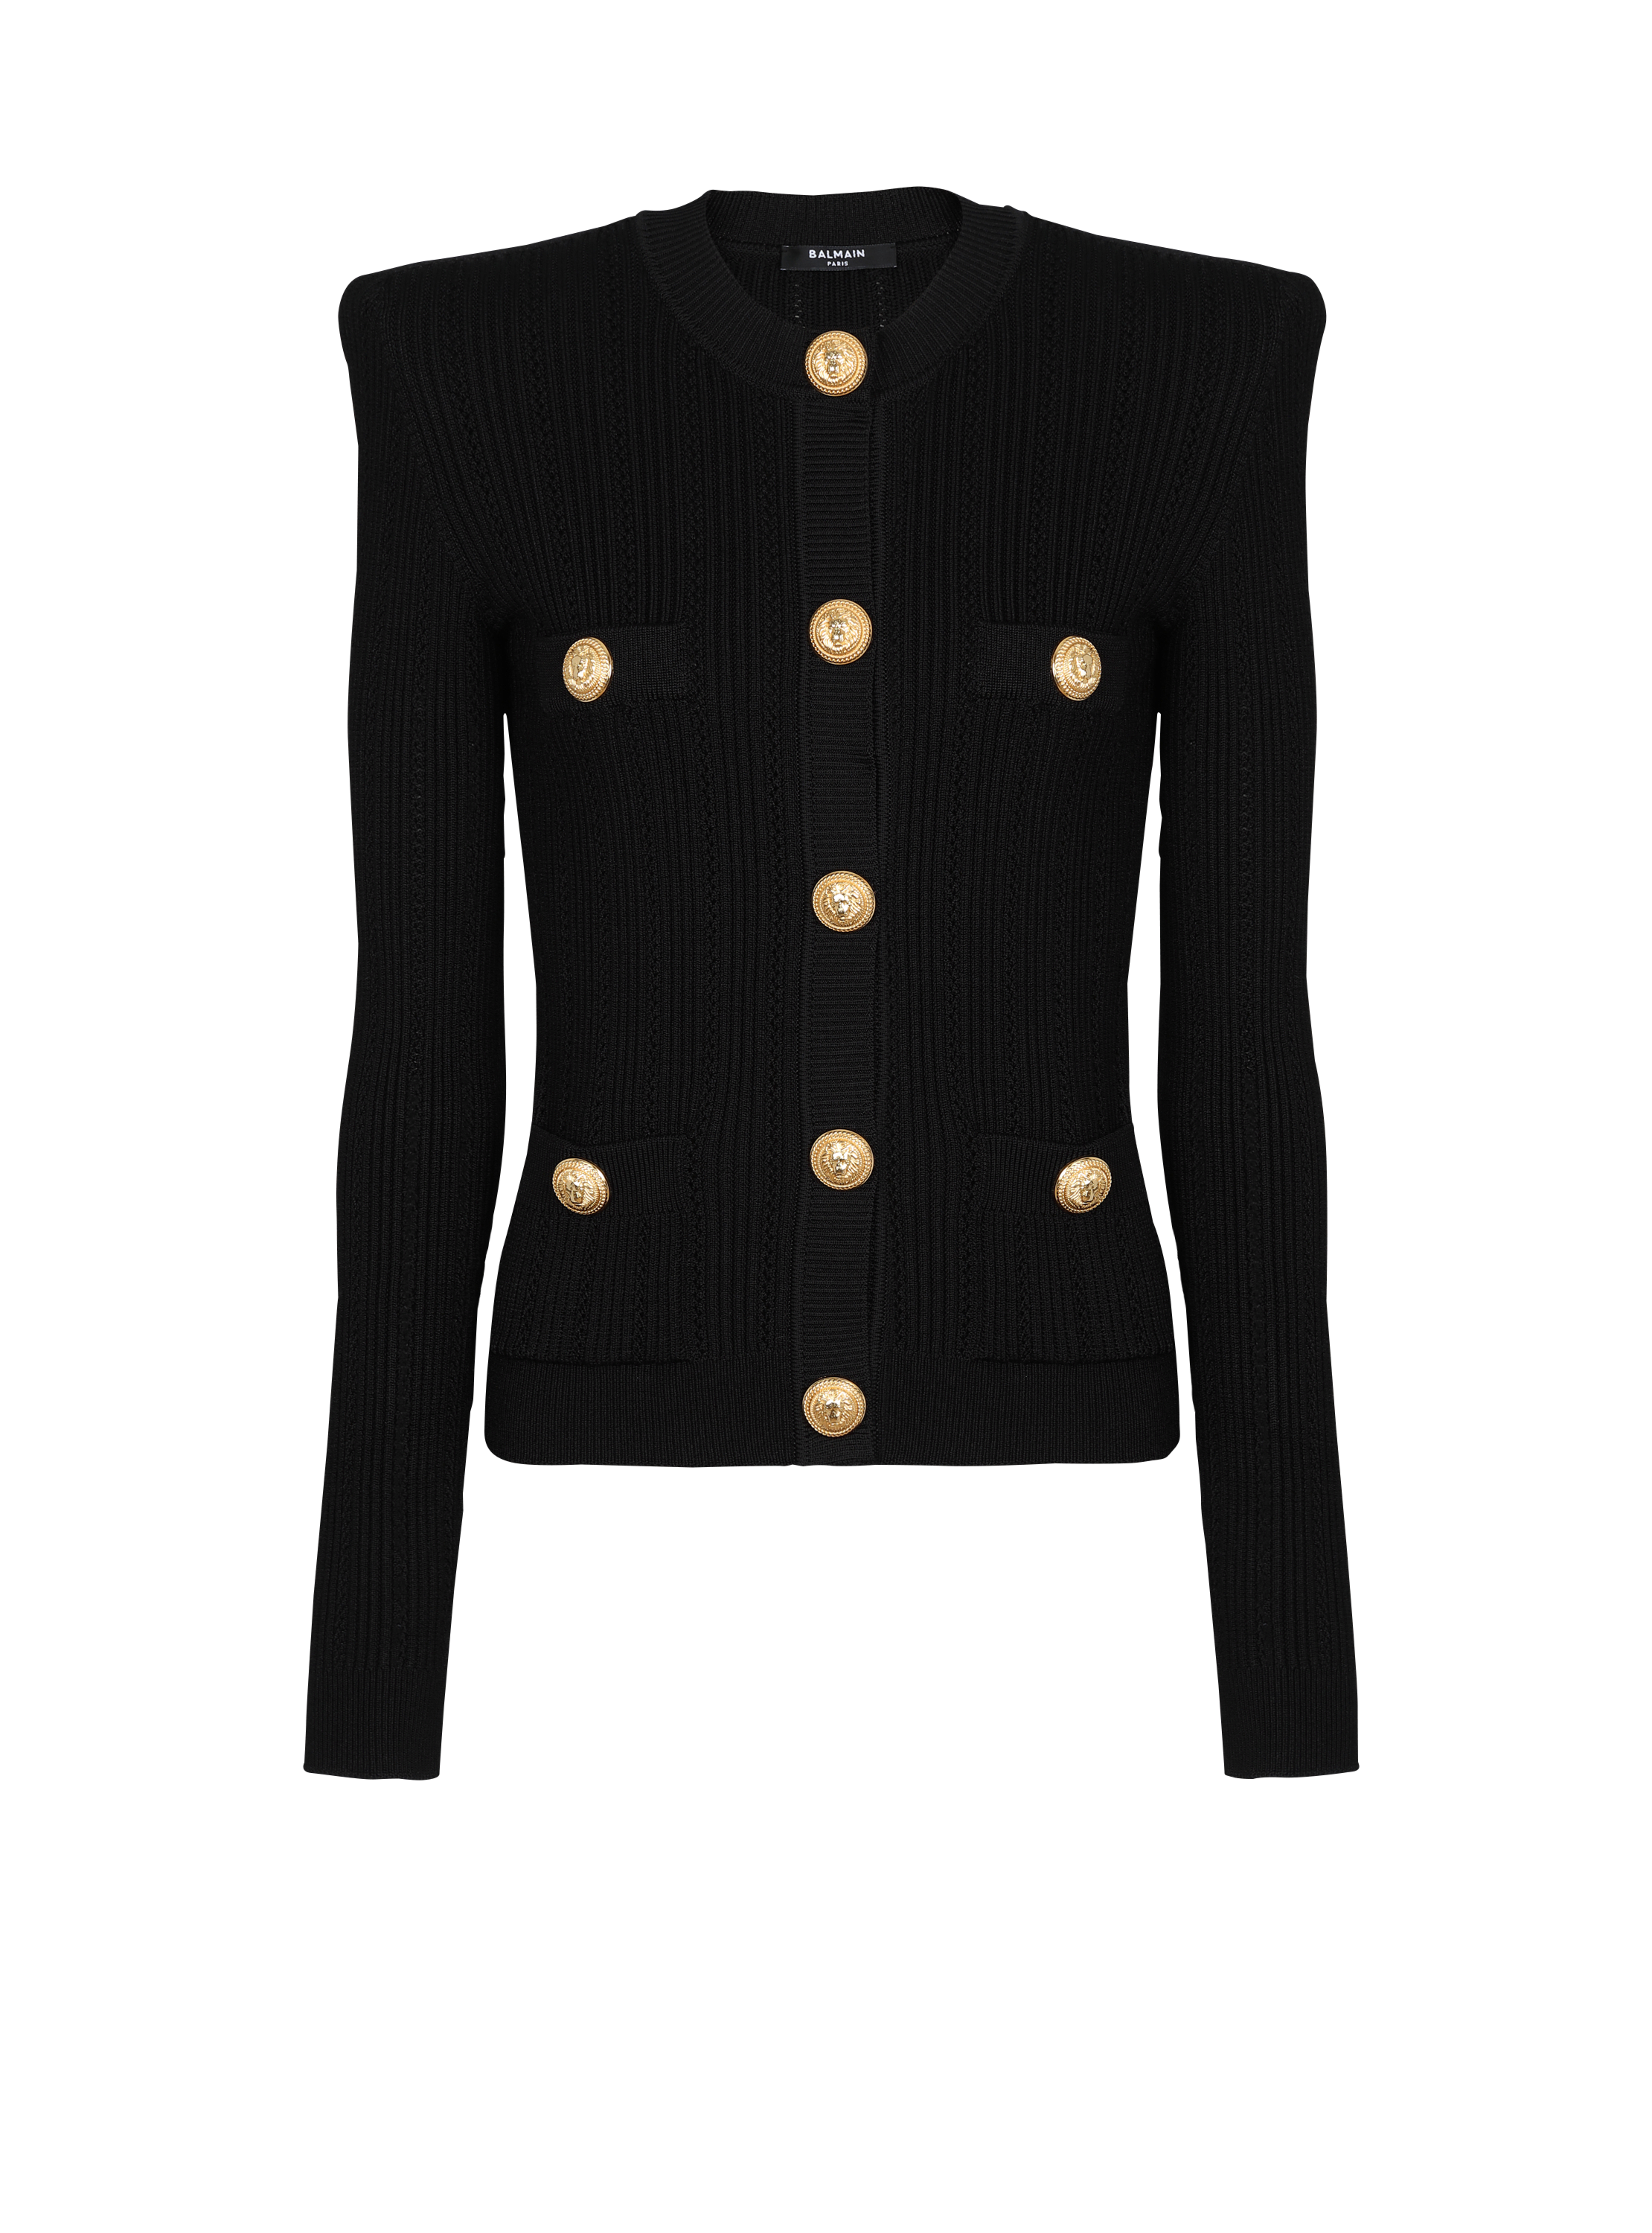 Cropped eco-designed knit cardigan with gold-tone buttons, black, hi-res